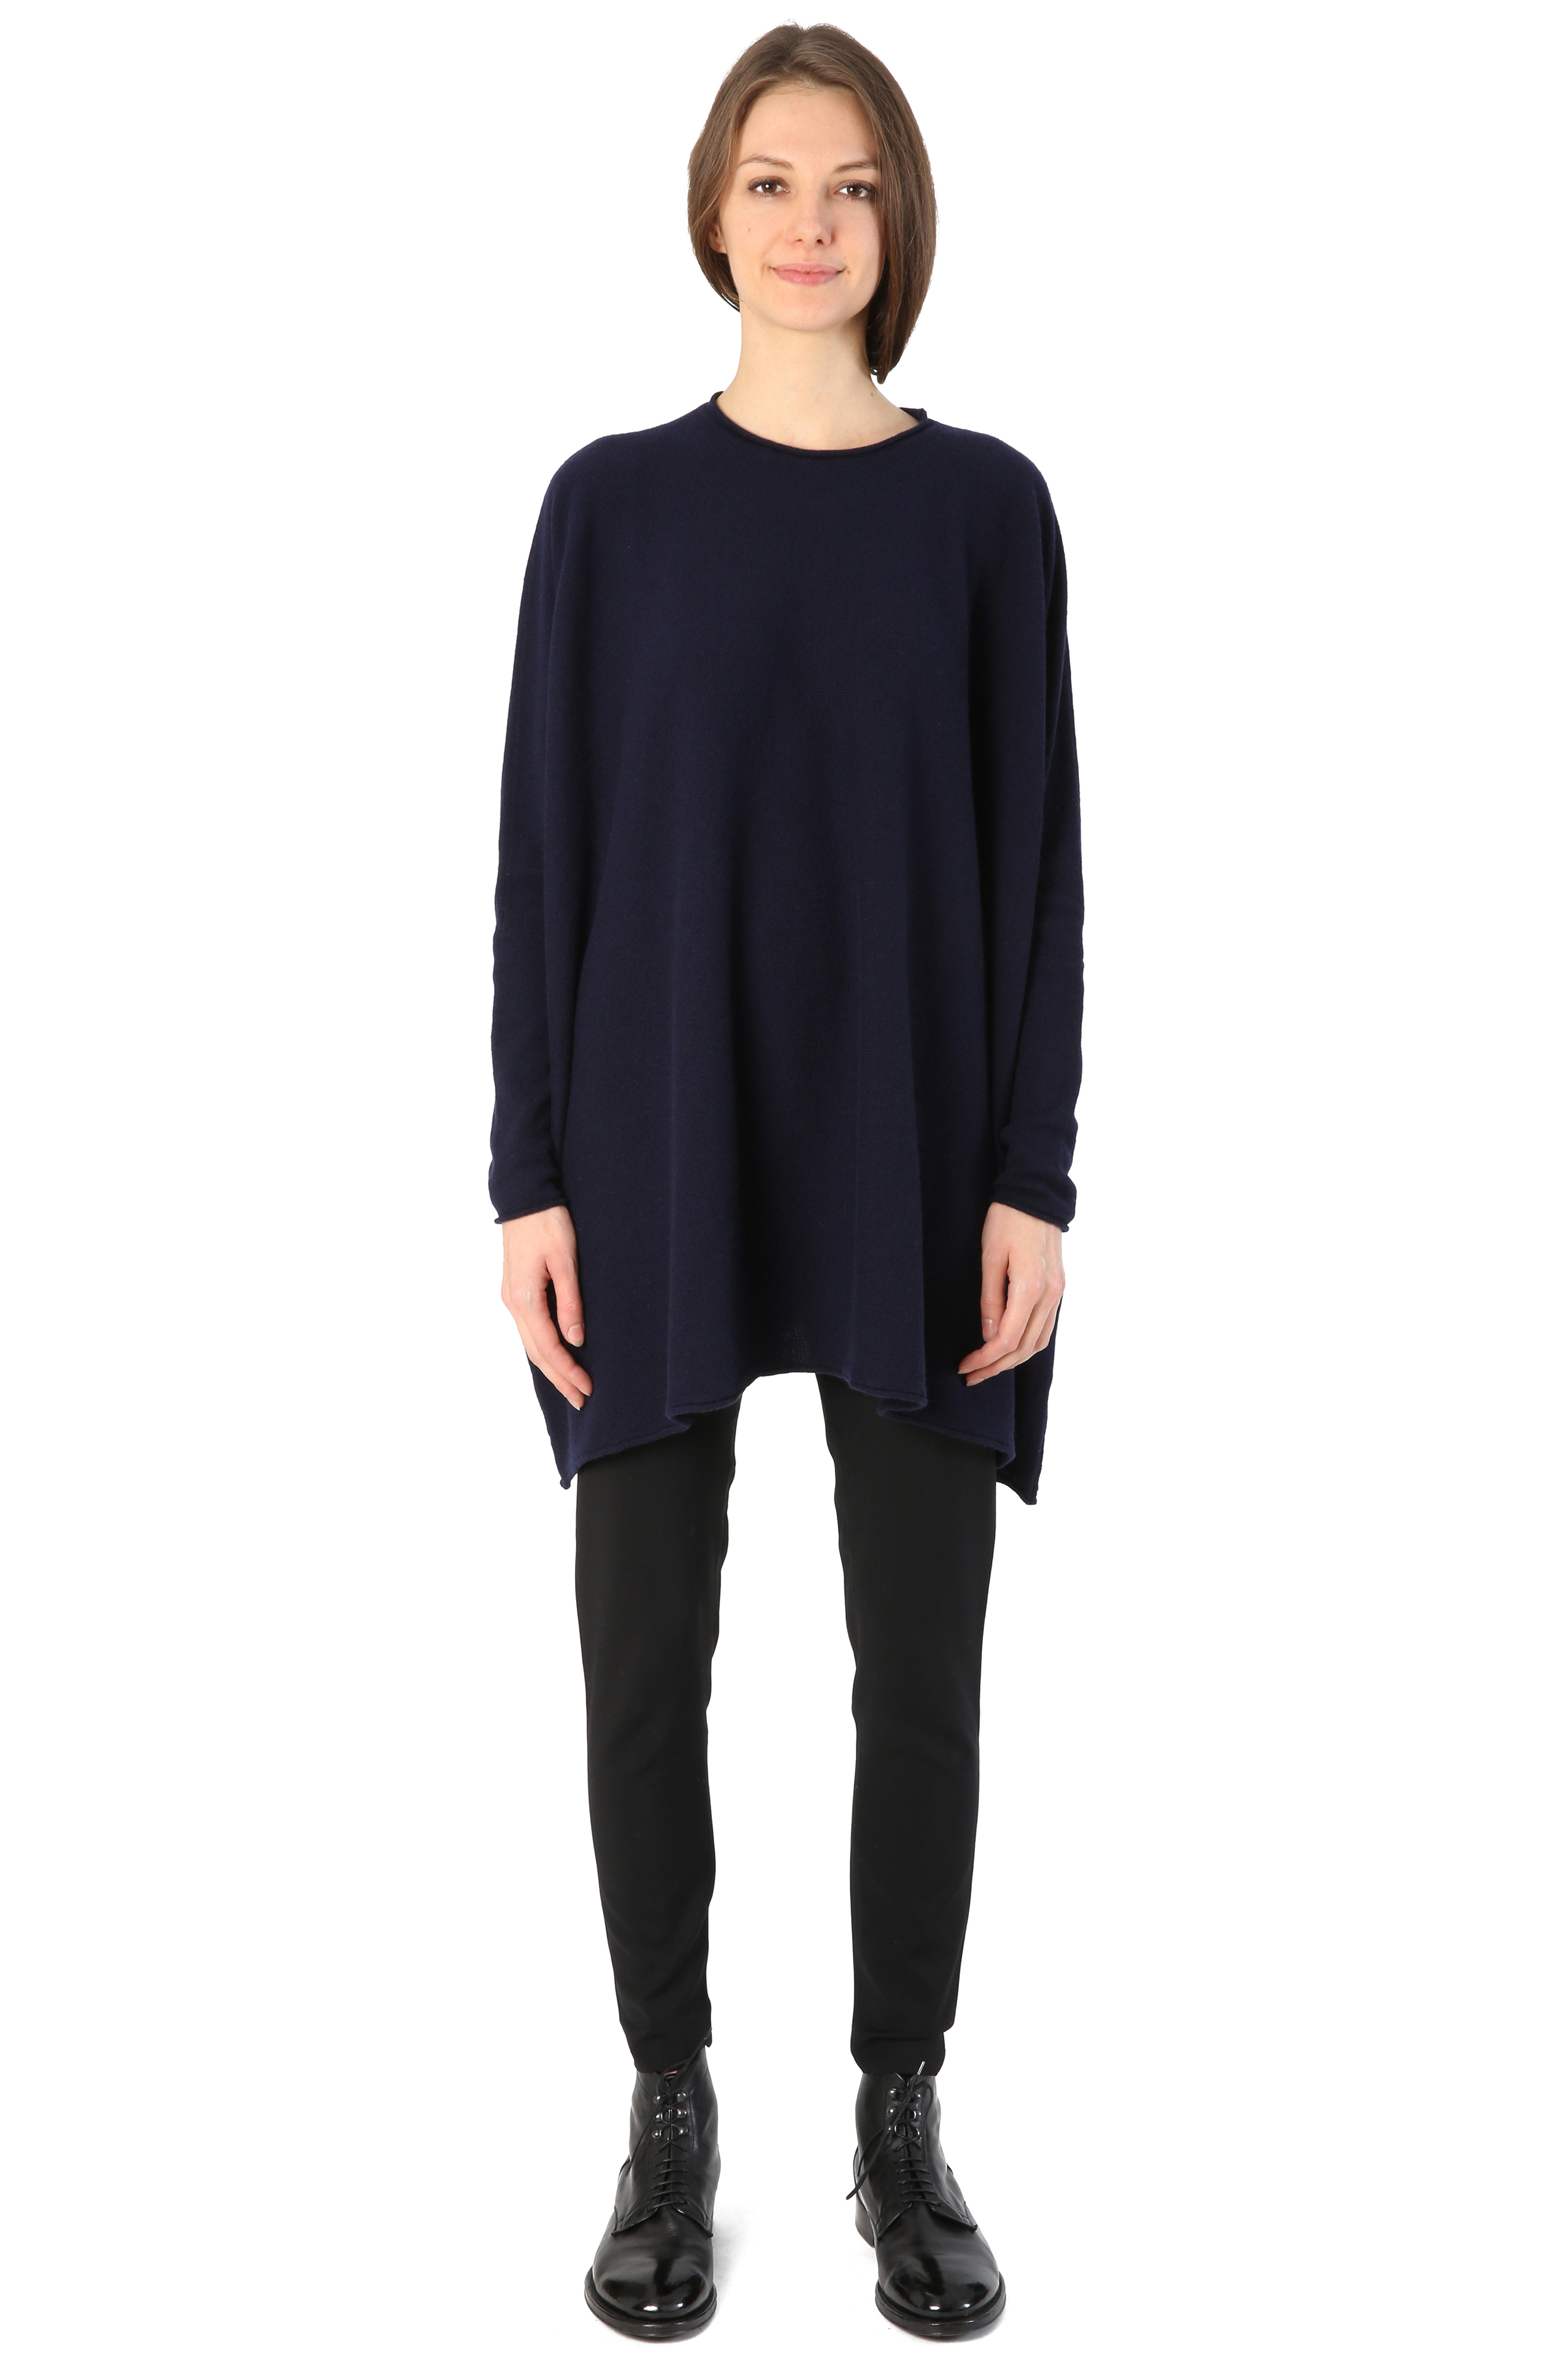 LONG CASHMERE SWEATER